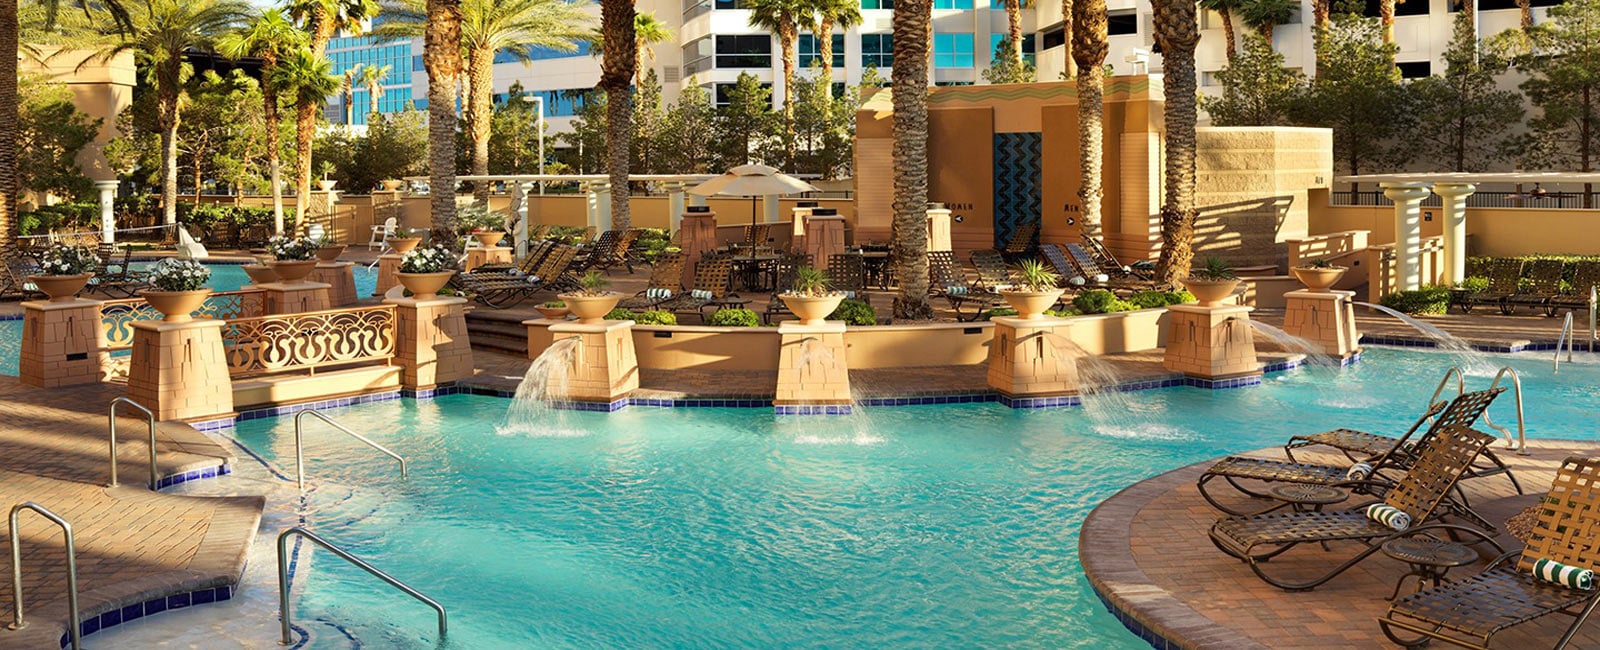 Pool Area of Hilton Grand Vacations on the Boulevard in Las Vegas, Nevada